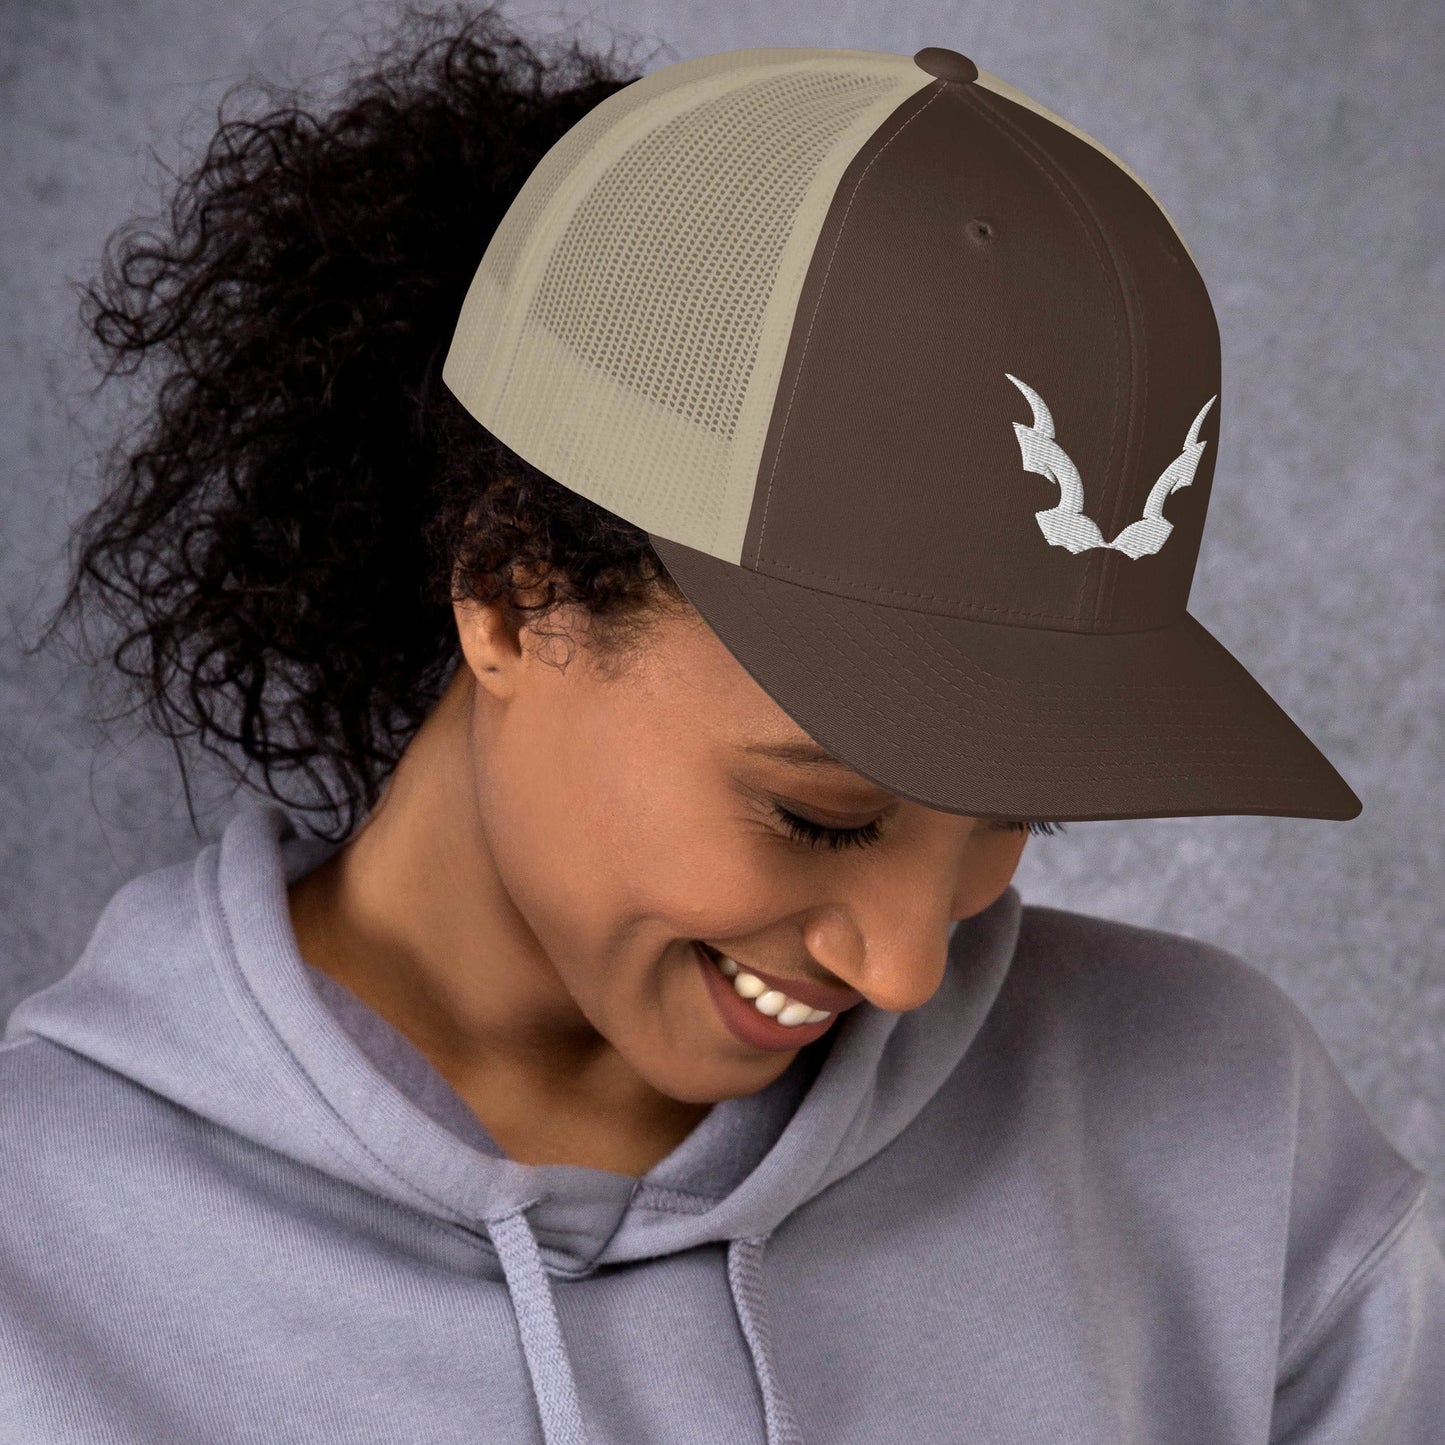 Trucker Cap With Markhor Horns Is On Its Way To Merch